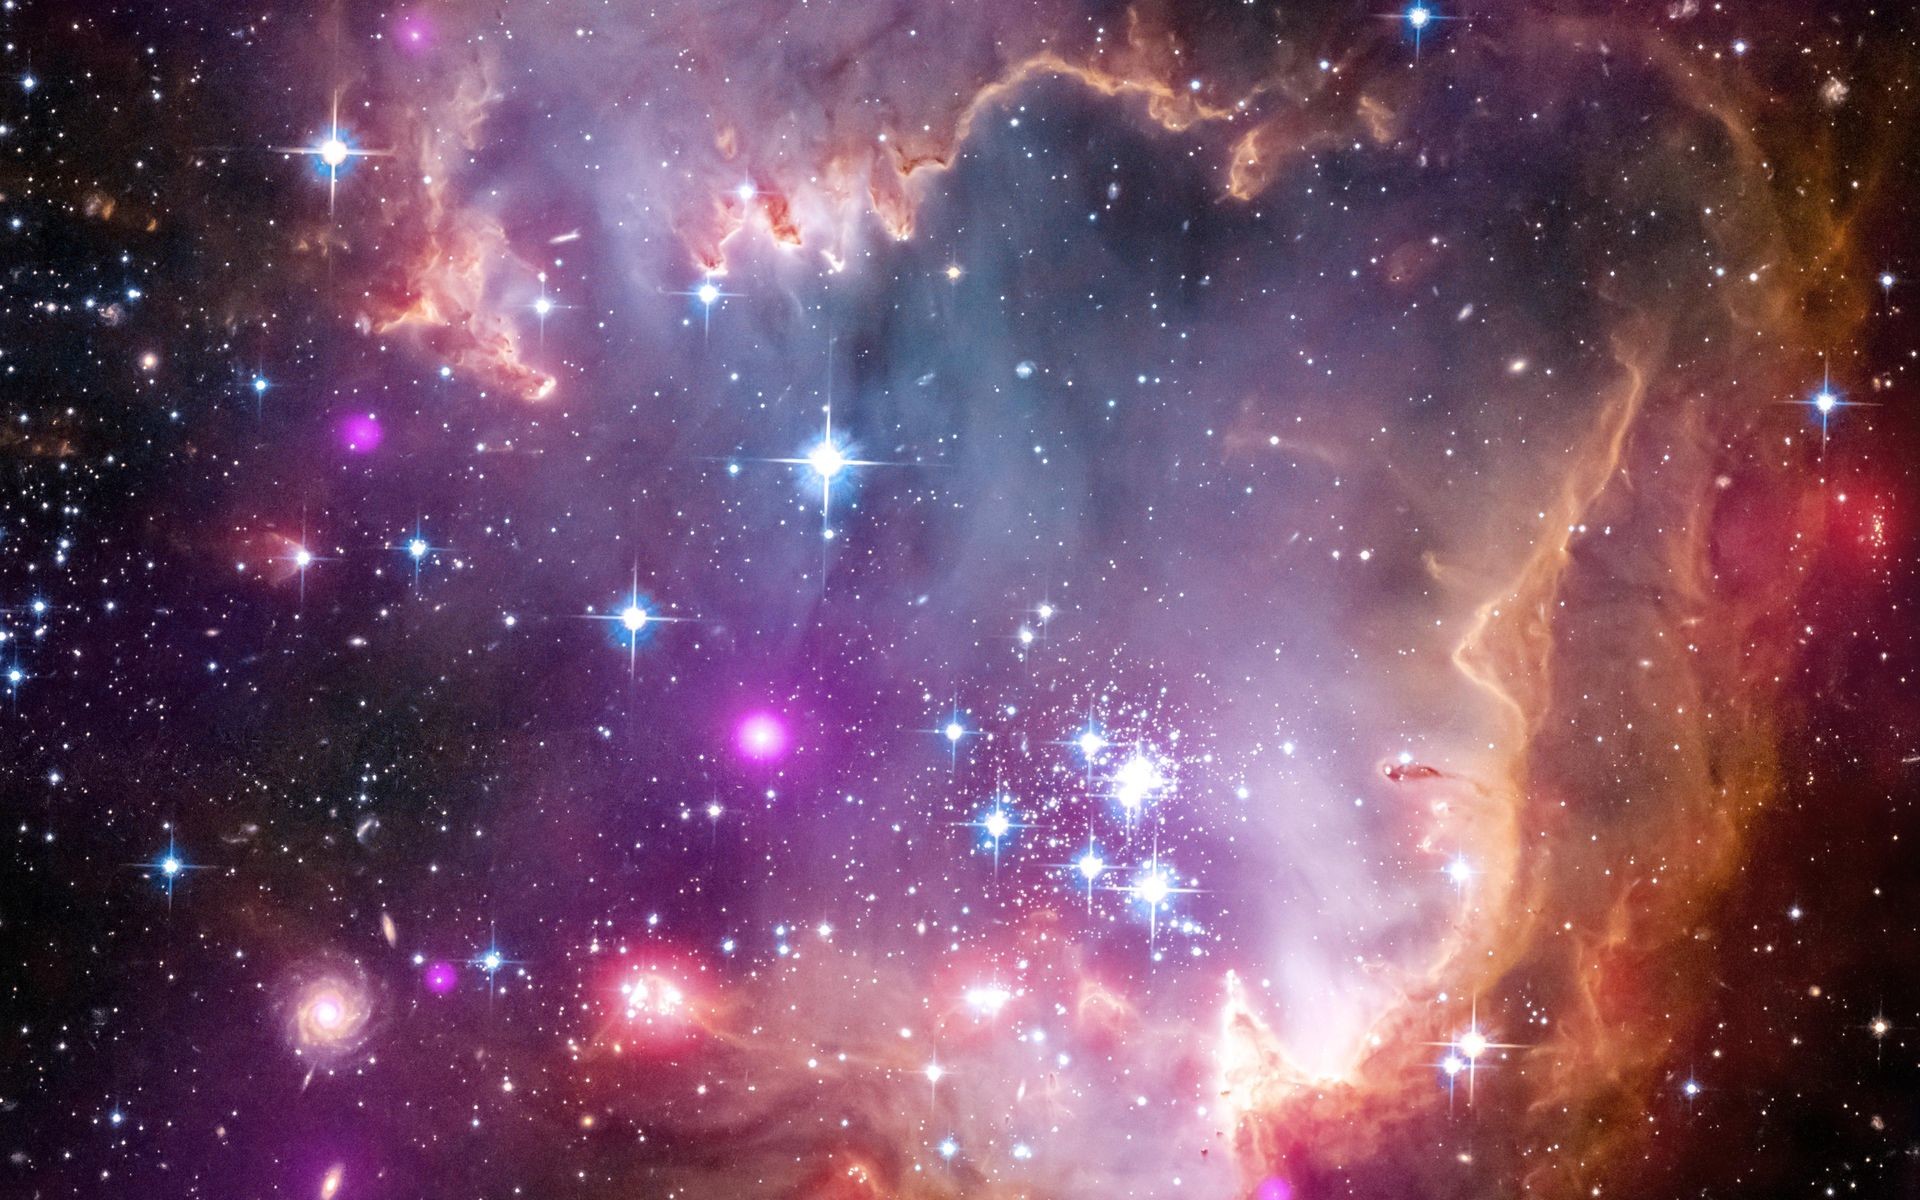 The tip of the wing of the Small Magellanic Cloud galaxy is dazzling in